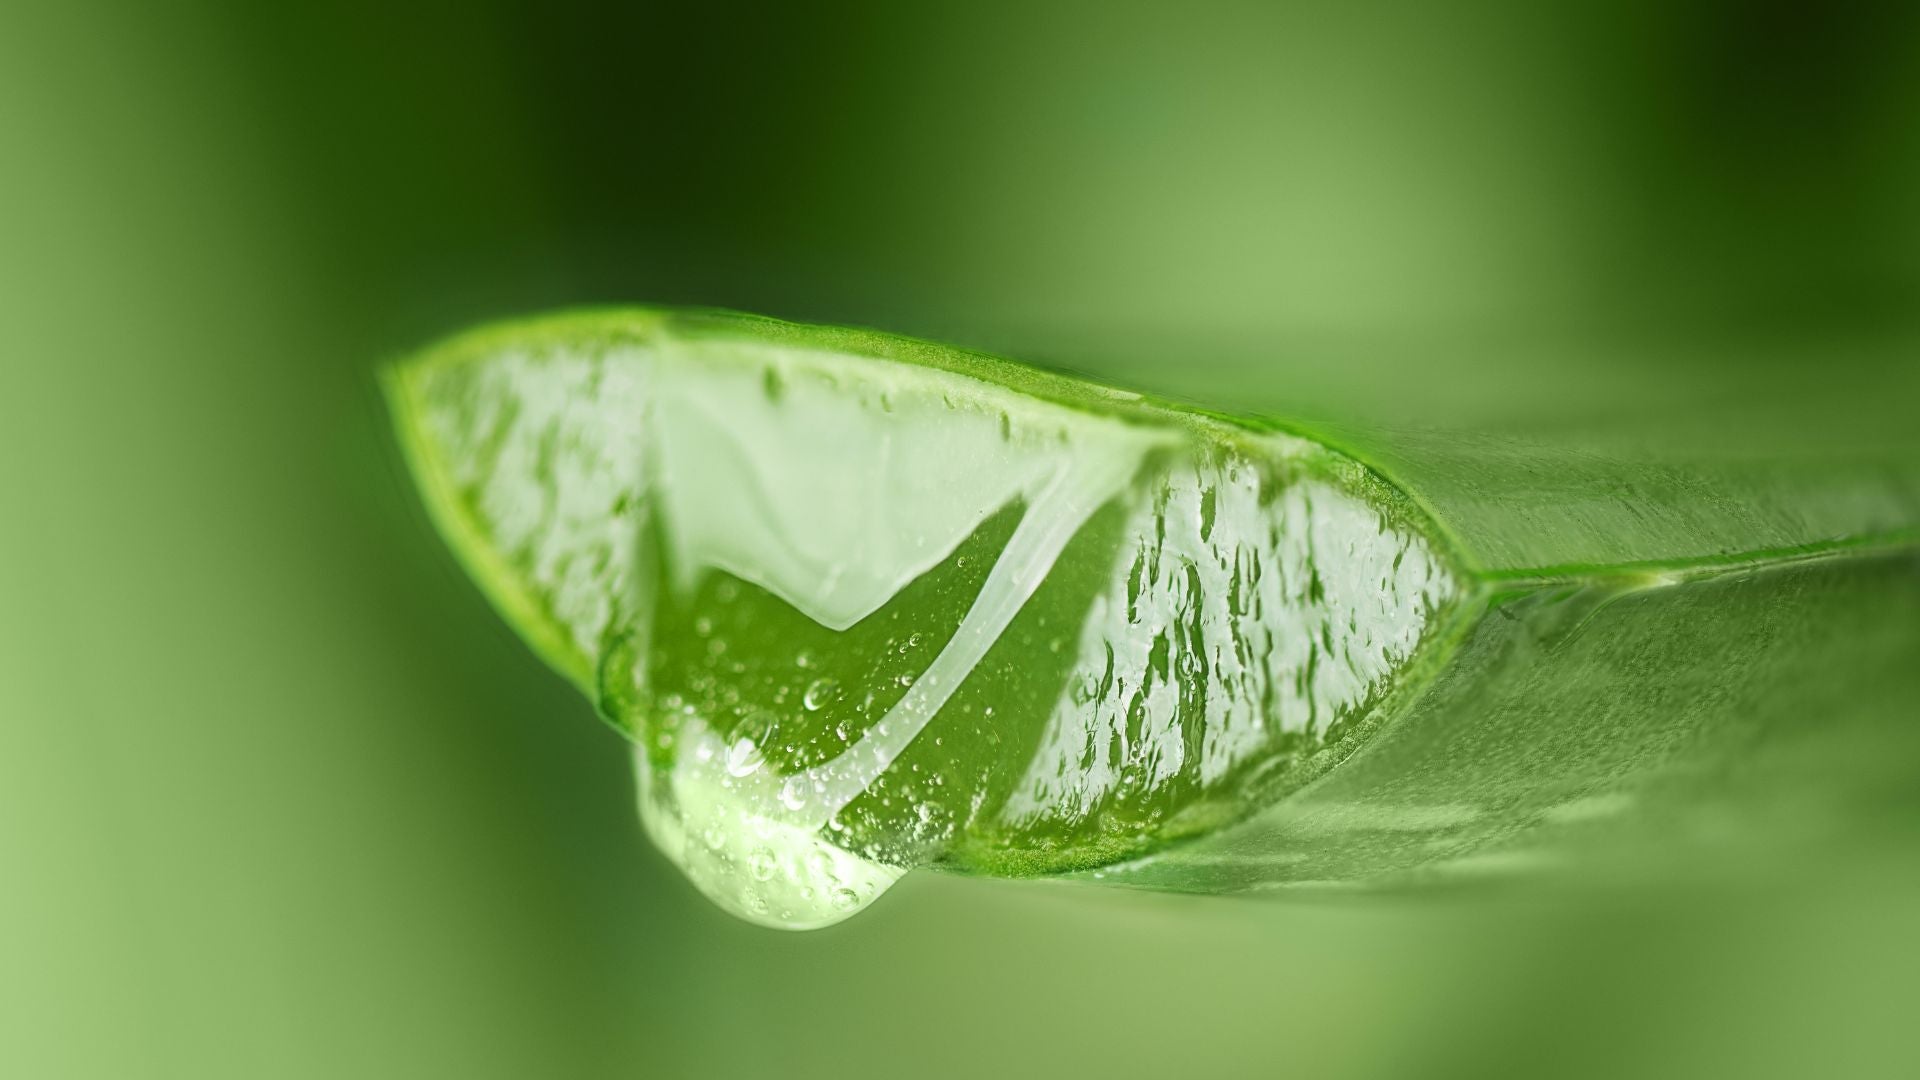 Aloe Vera: Ingredient for Soothing & Hydrating